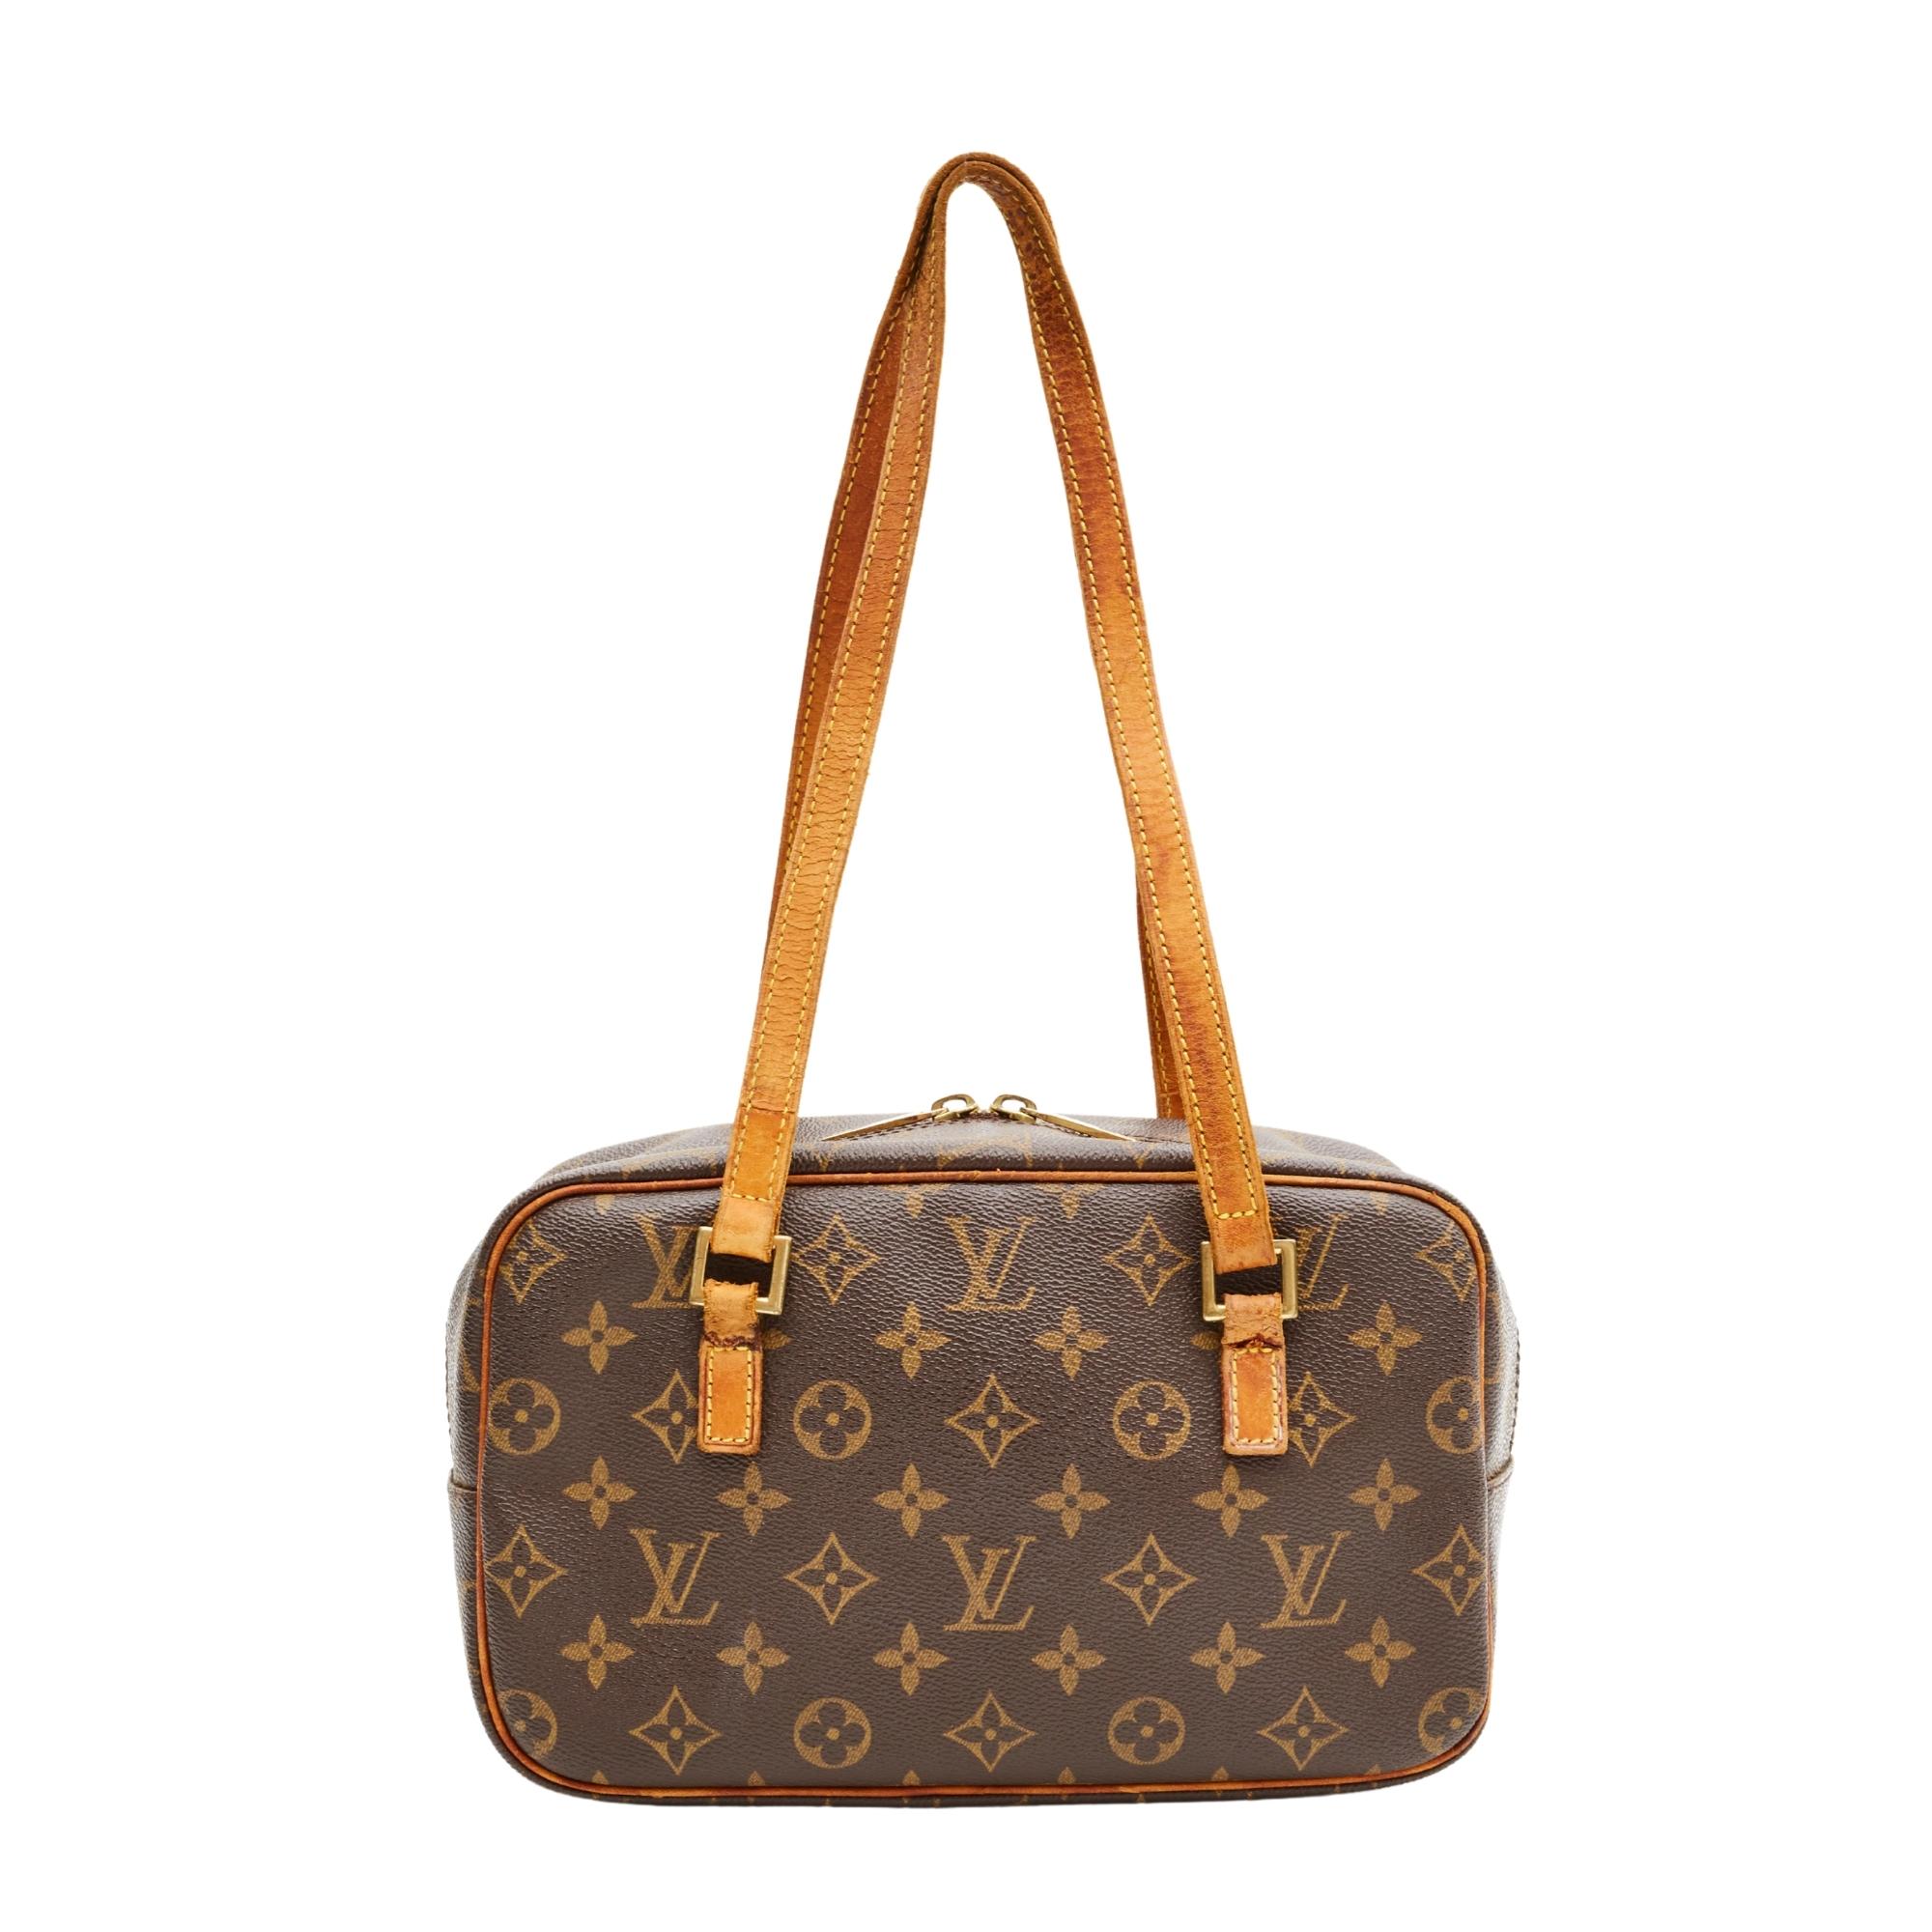 This bag is made with brown monogram coated canvas with nice light caramel natural leather finishes. The bag features a front zip compartment, top zip closure with double zippers, dual flat top handles and a terra-cotta cross grain leather